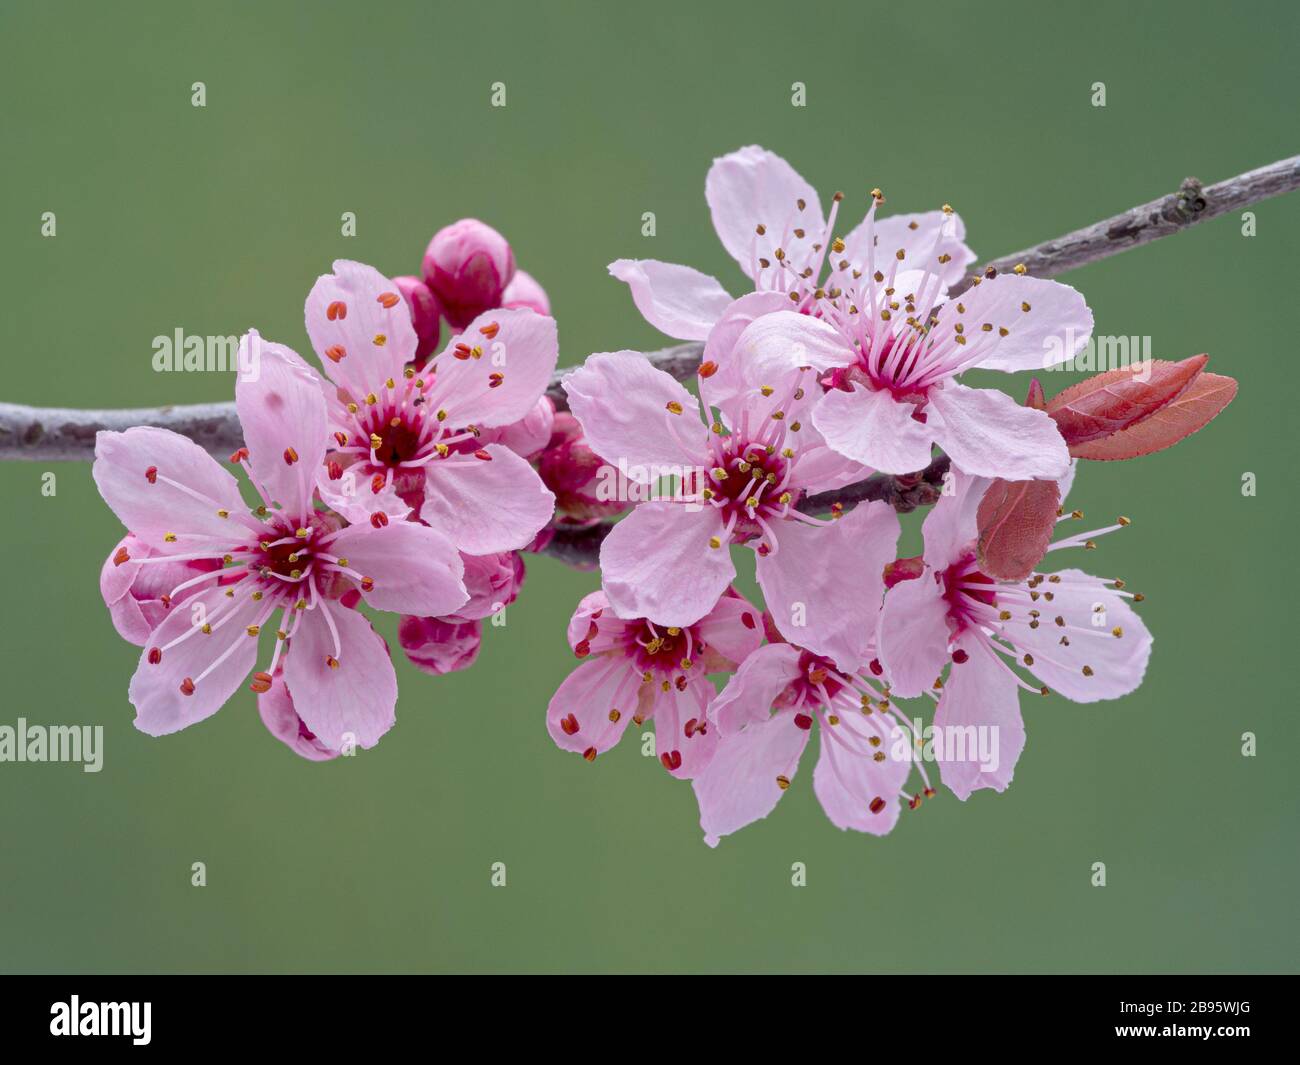 Closeup of the spring blossoms of a plum tree (Prunus species) blooming in Ladner, Delta, British Columbia, Canada Stock Photo